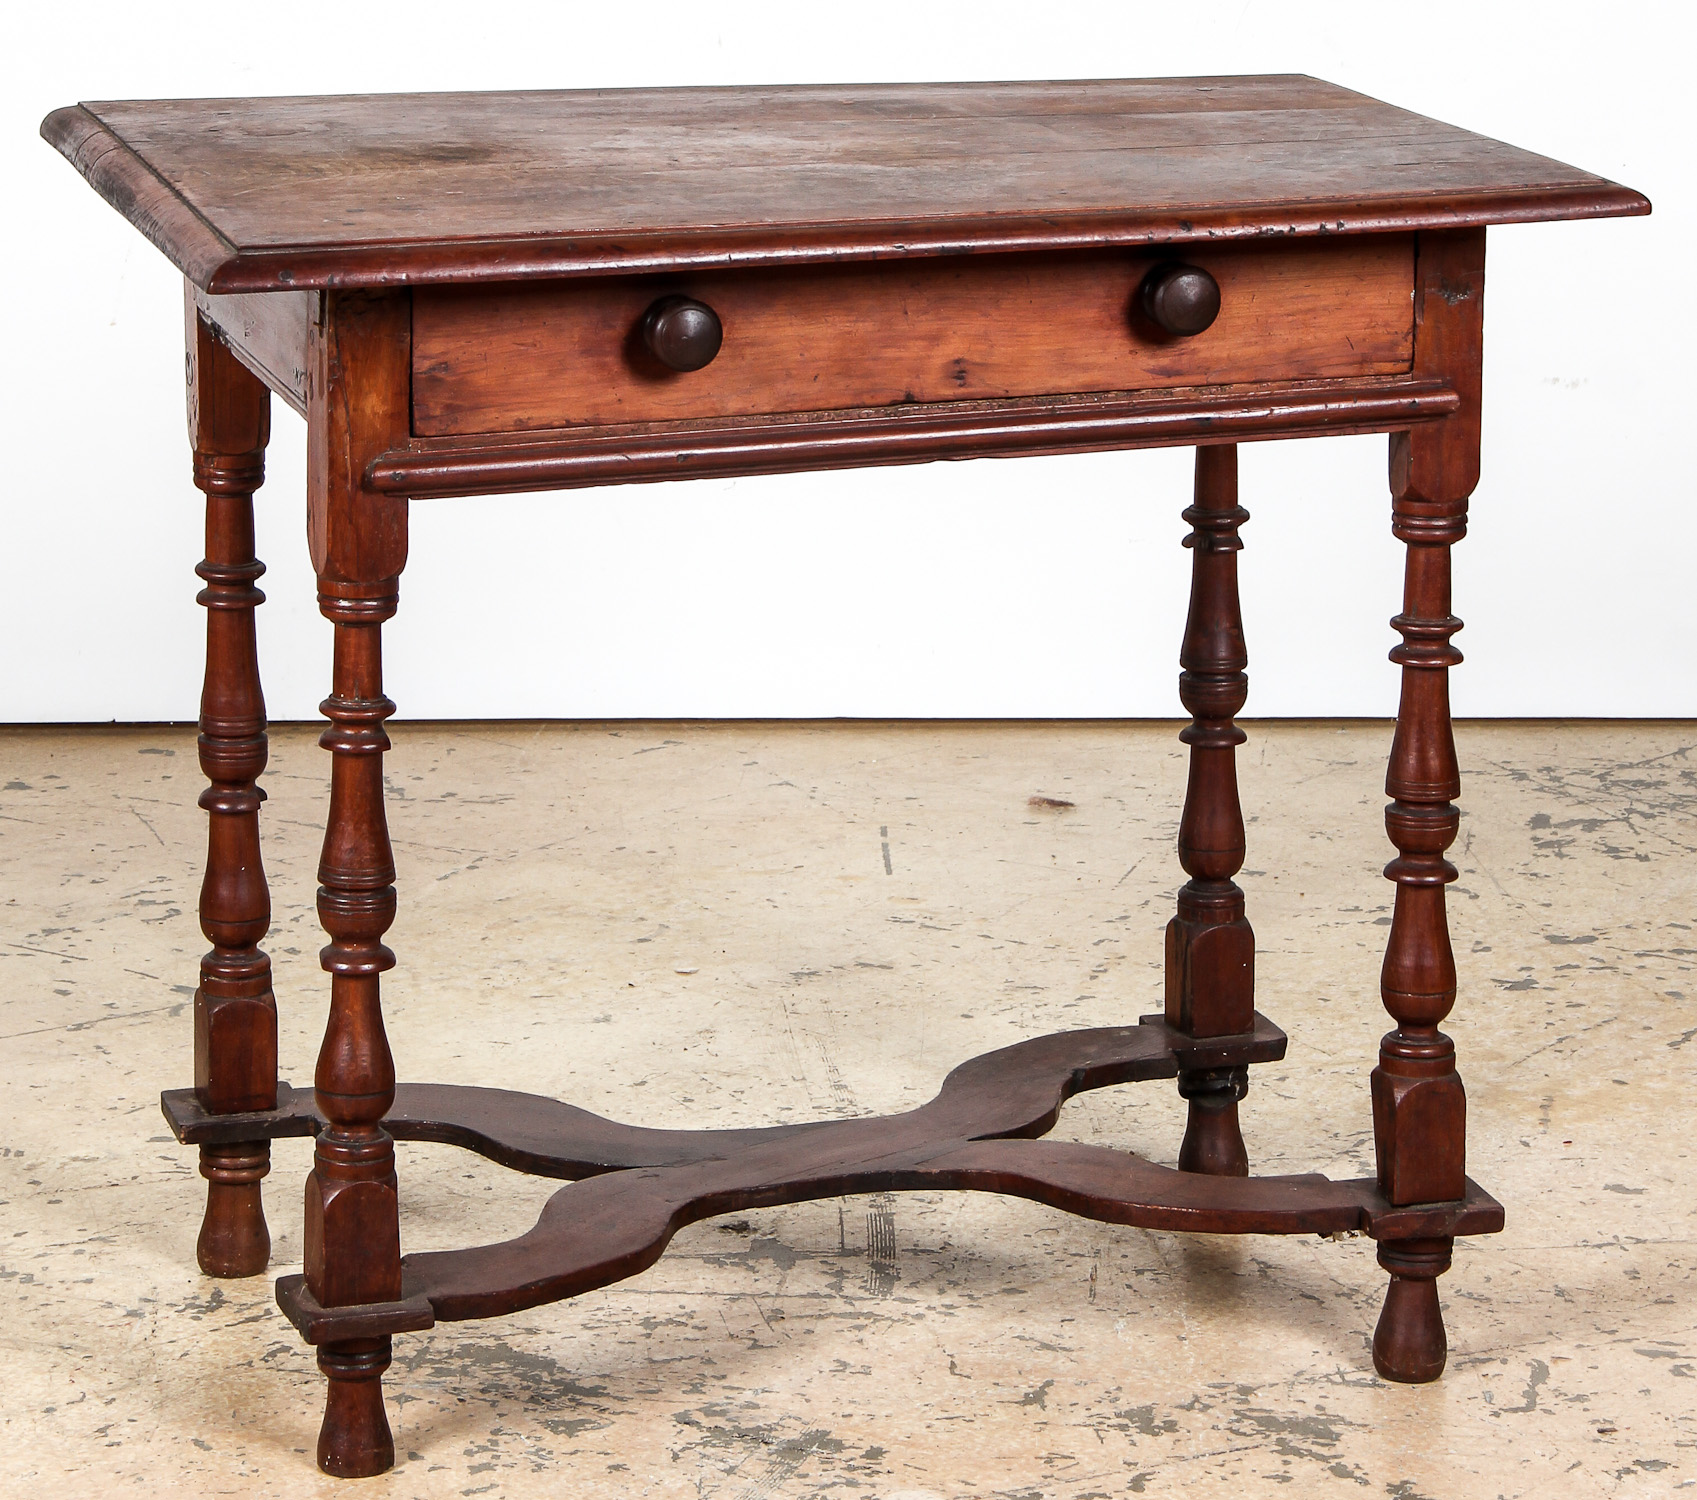 Early American Tavern Table. Pine and fruitwood. Purchased in 1960 from Parke- Bennett Auctions.